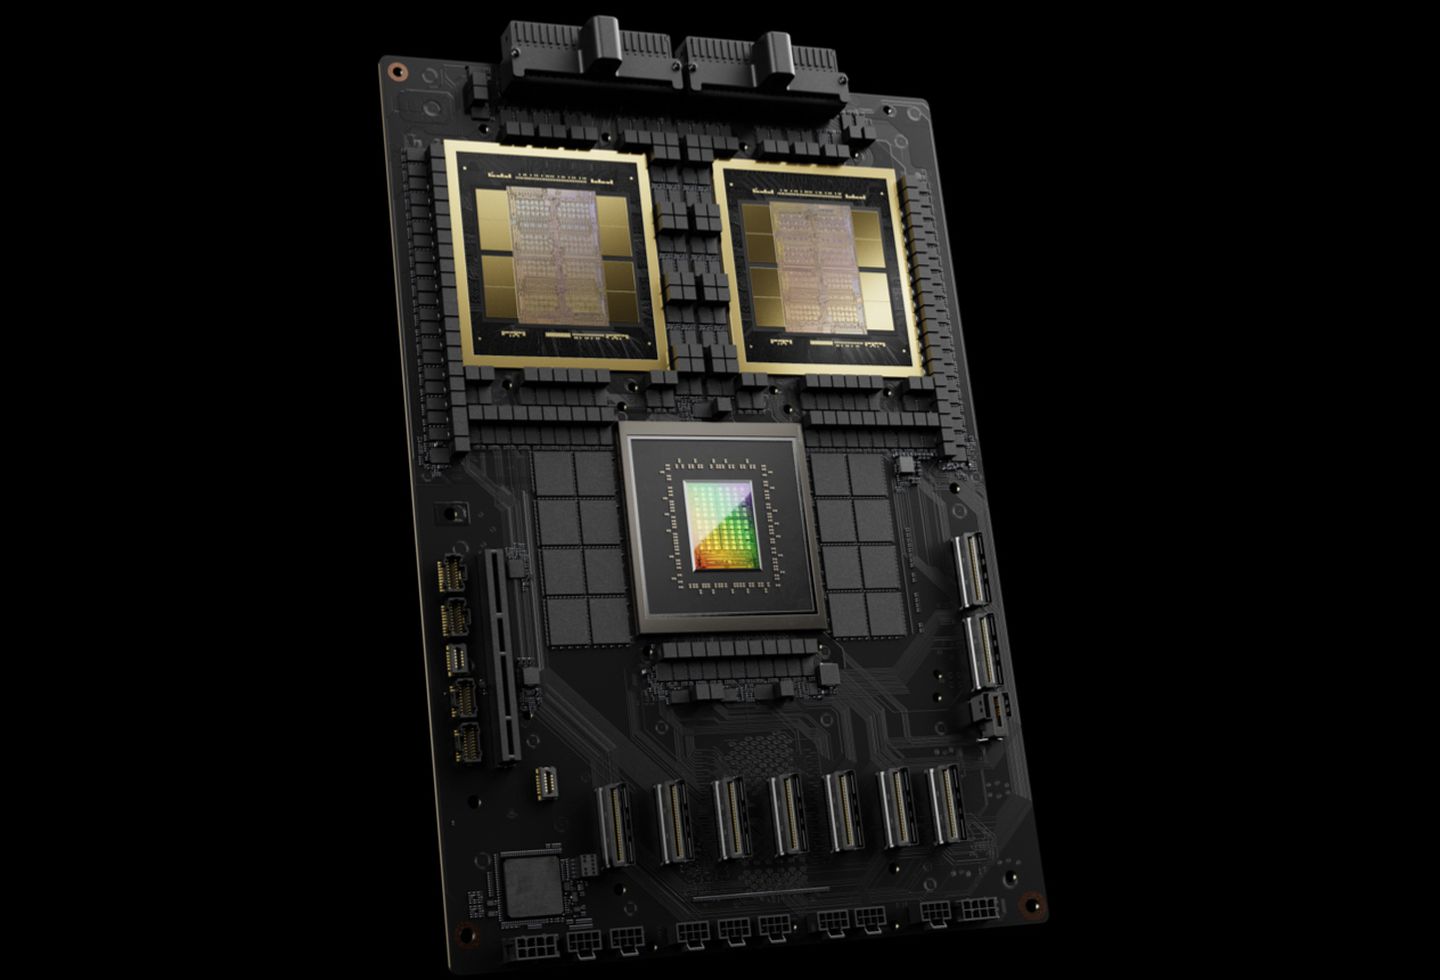 What You Should Know About the 'World's Most Powerful AI Chip' That Nvidia Unveiled at GTC